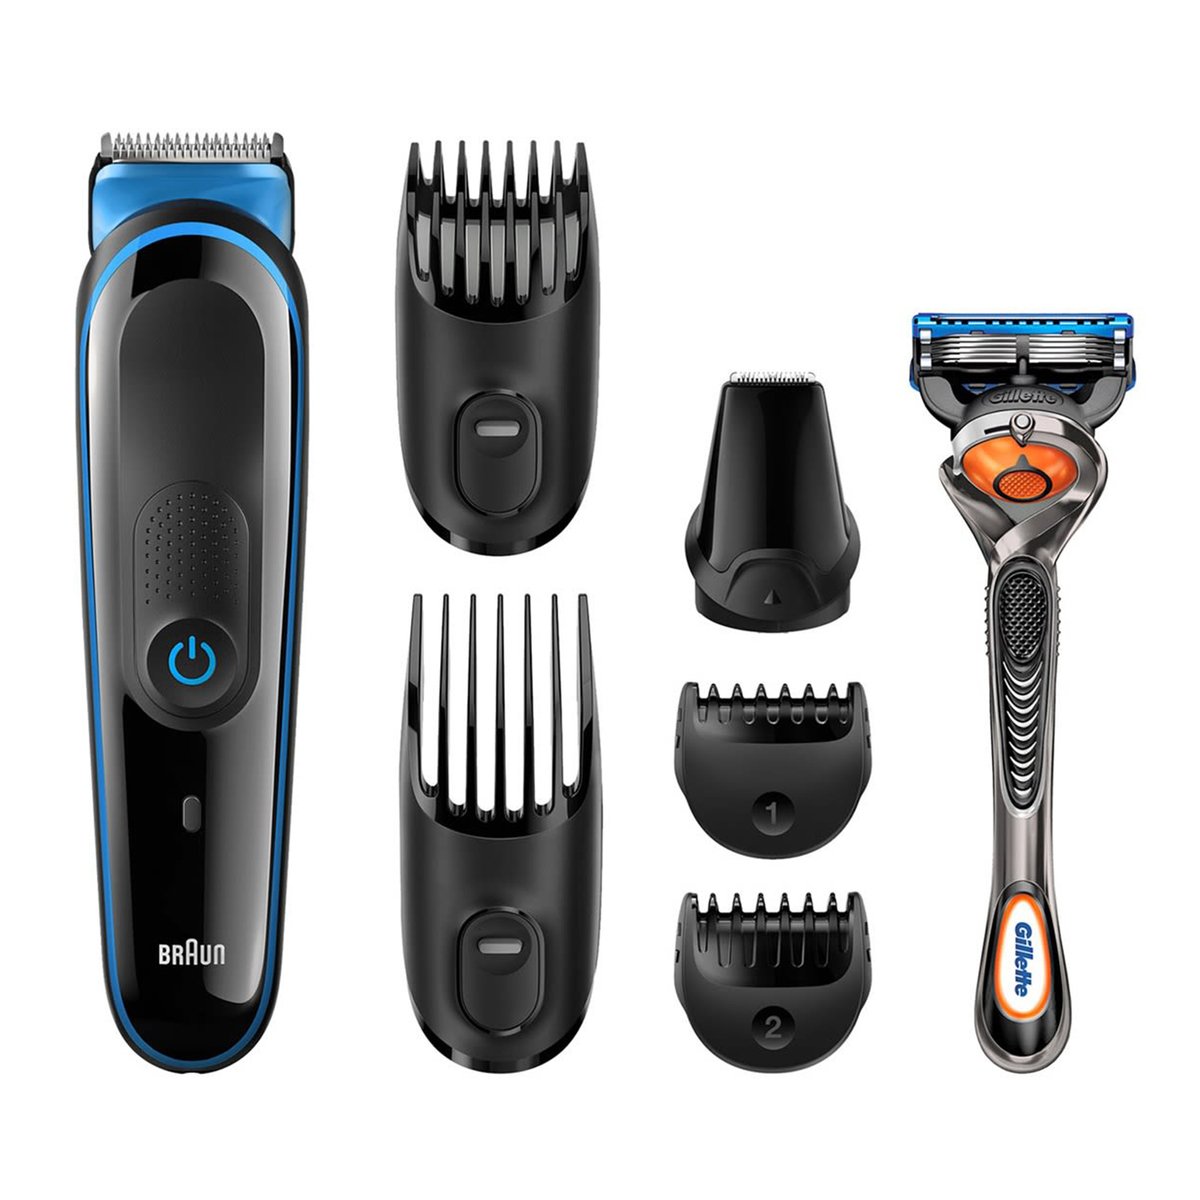 Braun multi grooming kit MGK3045 7 in one face and body trimming kit